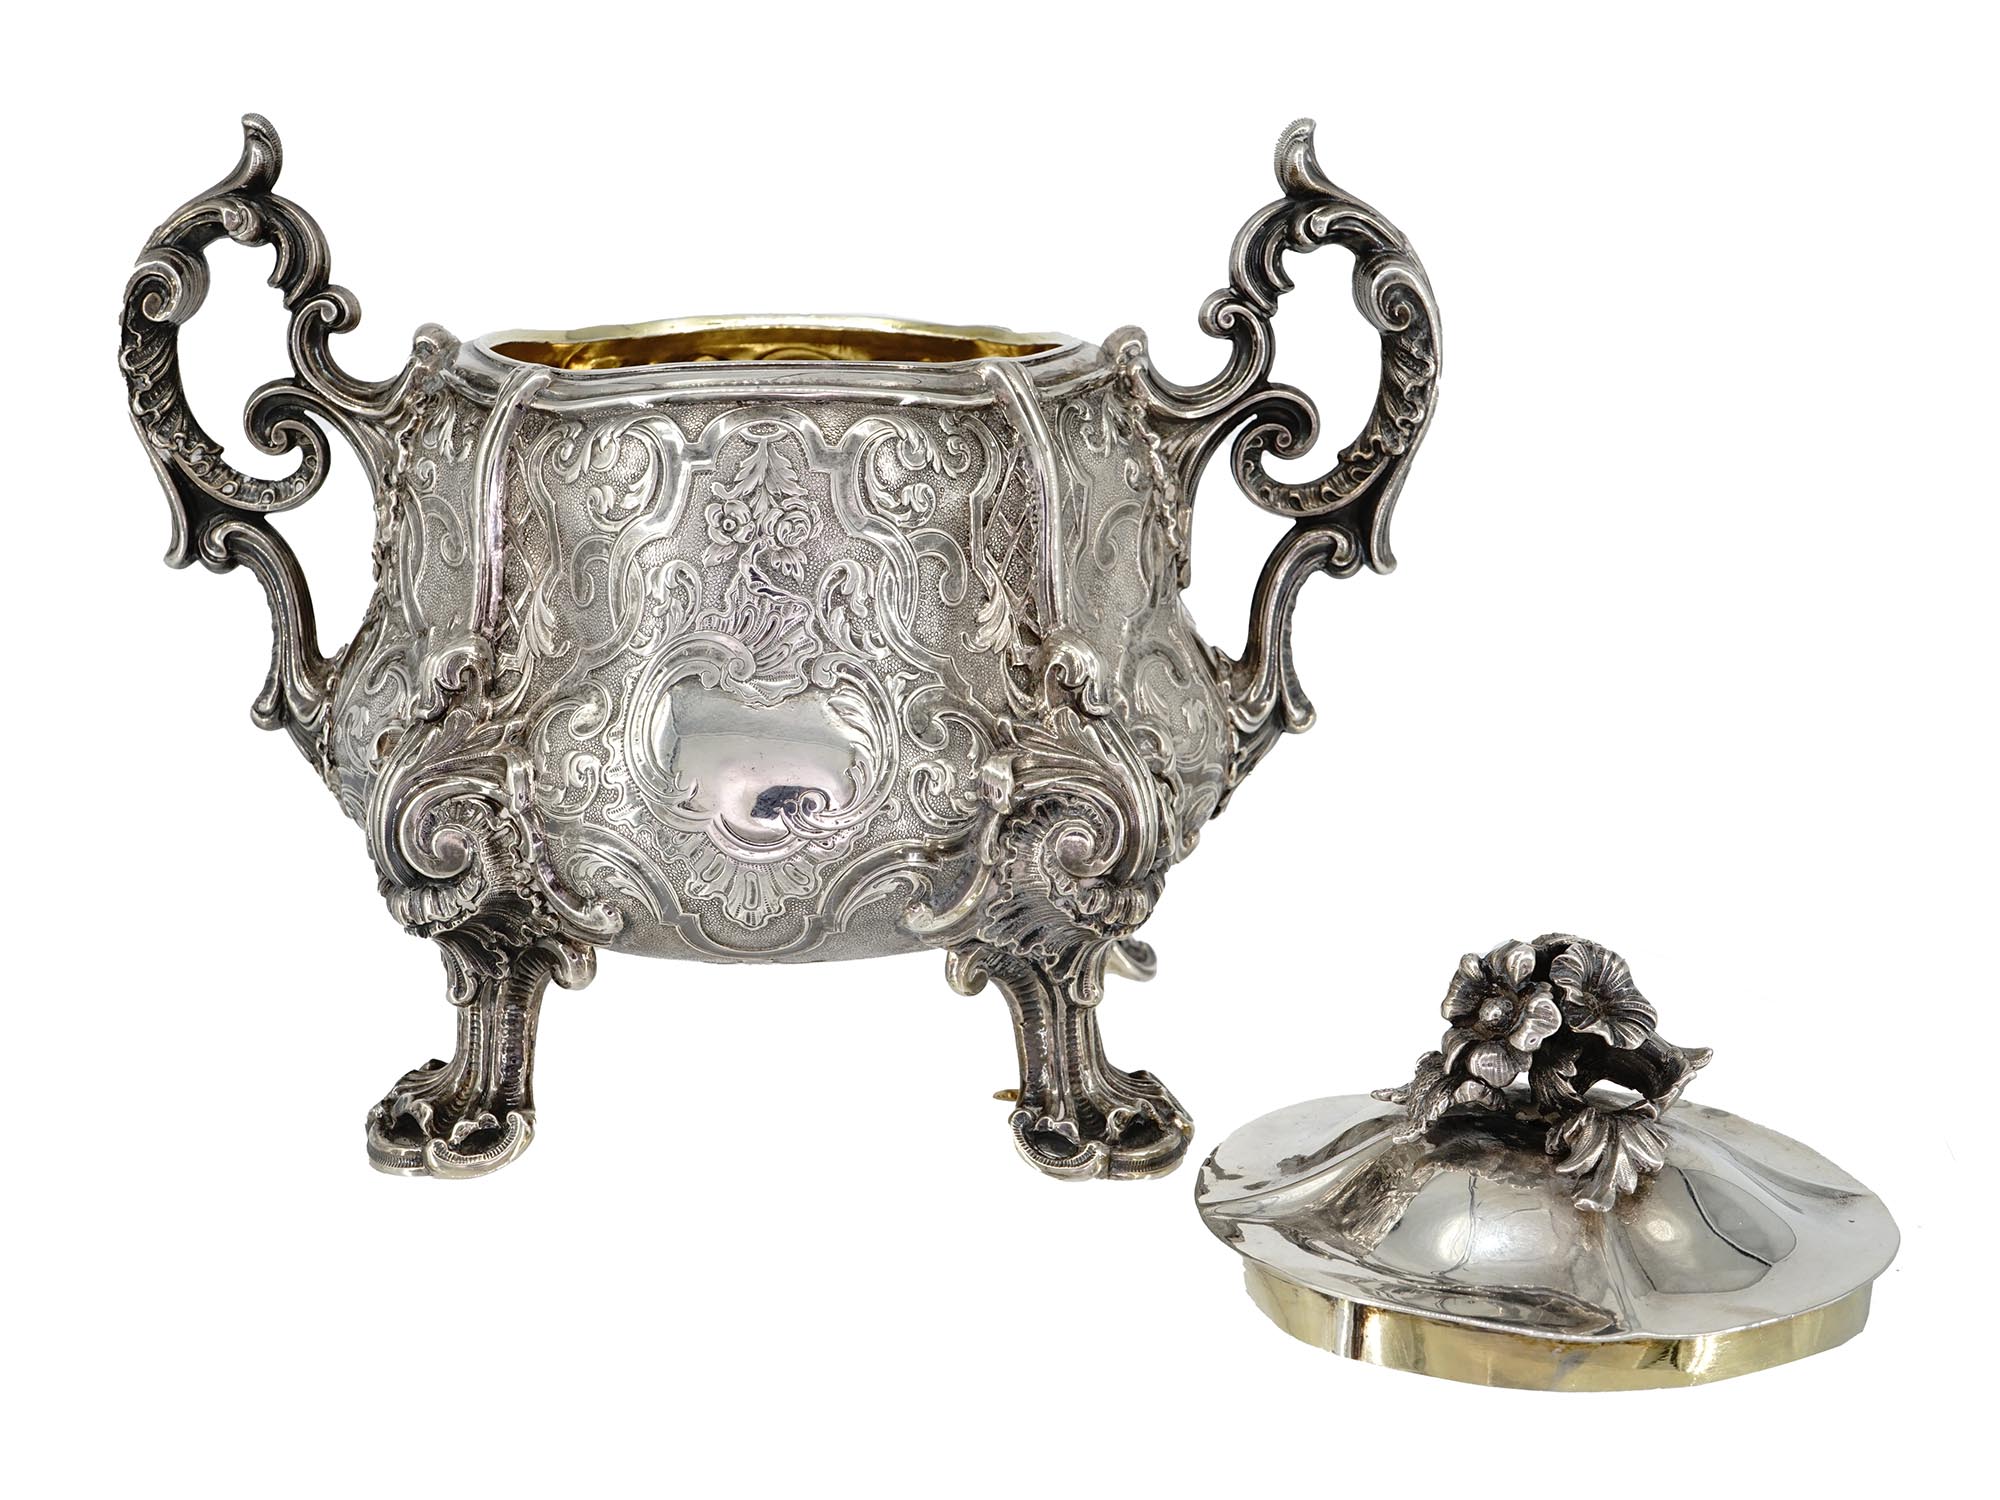 ANTIQUE FRENCH SILVER LIDDED SUGAR BOWL BY ODIOT PIC-3